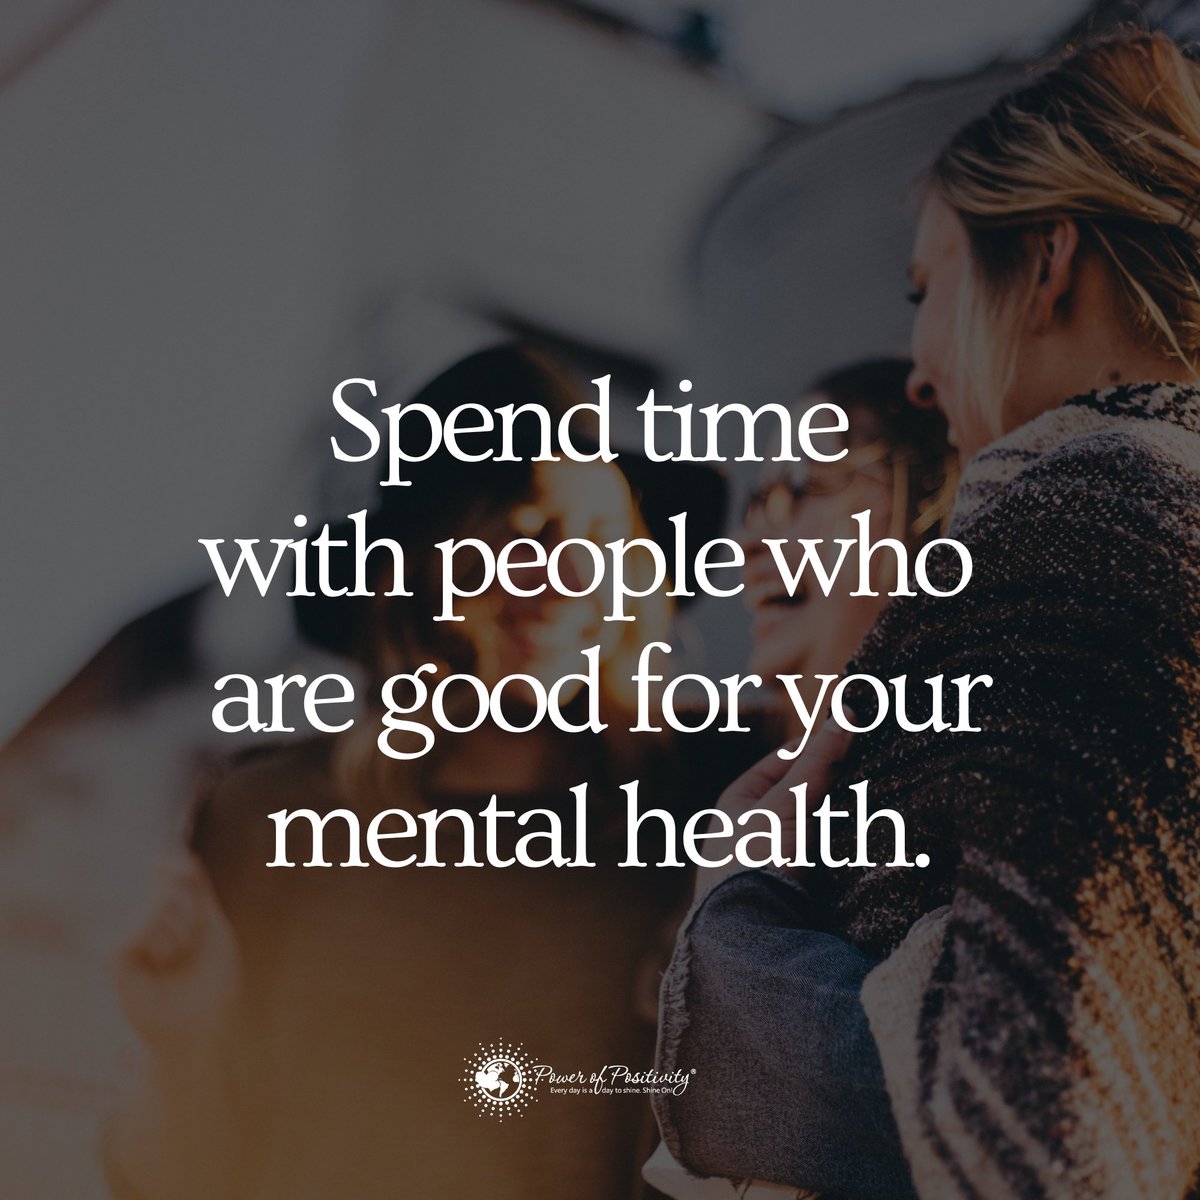 Spend time with people who are good for your mental health.